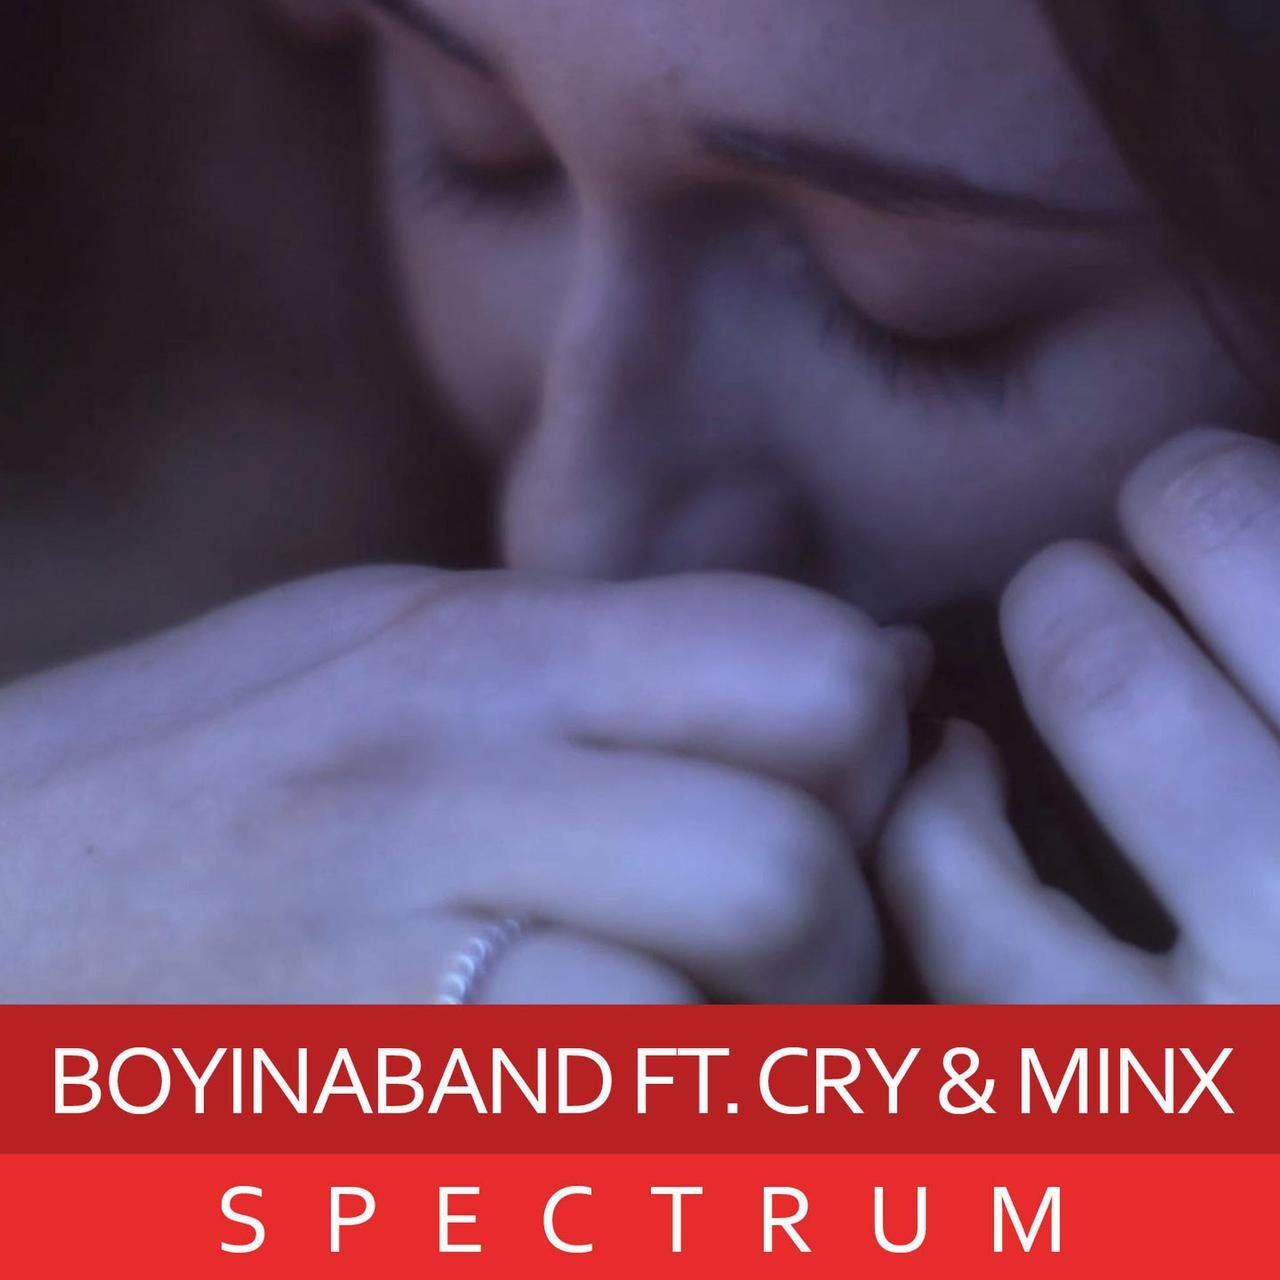 Boyinaband featuring Cryaotic & MINX — Spectrum cover artwork